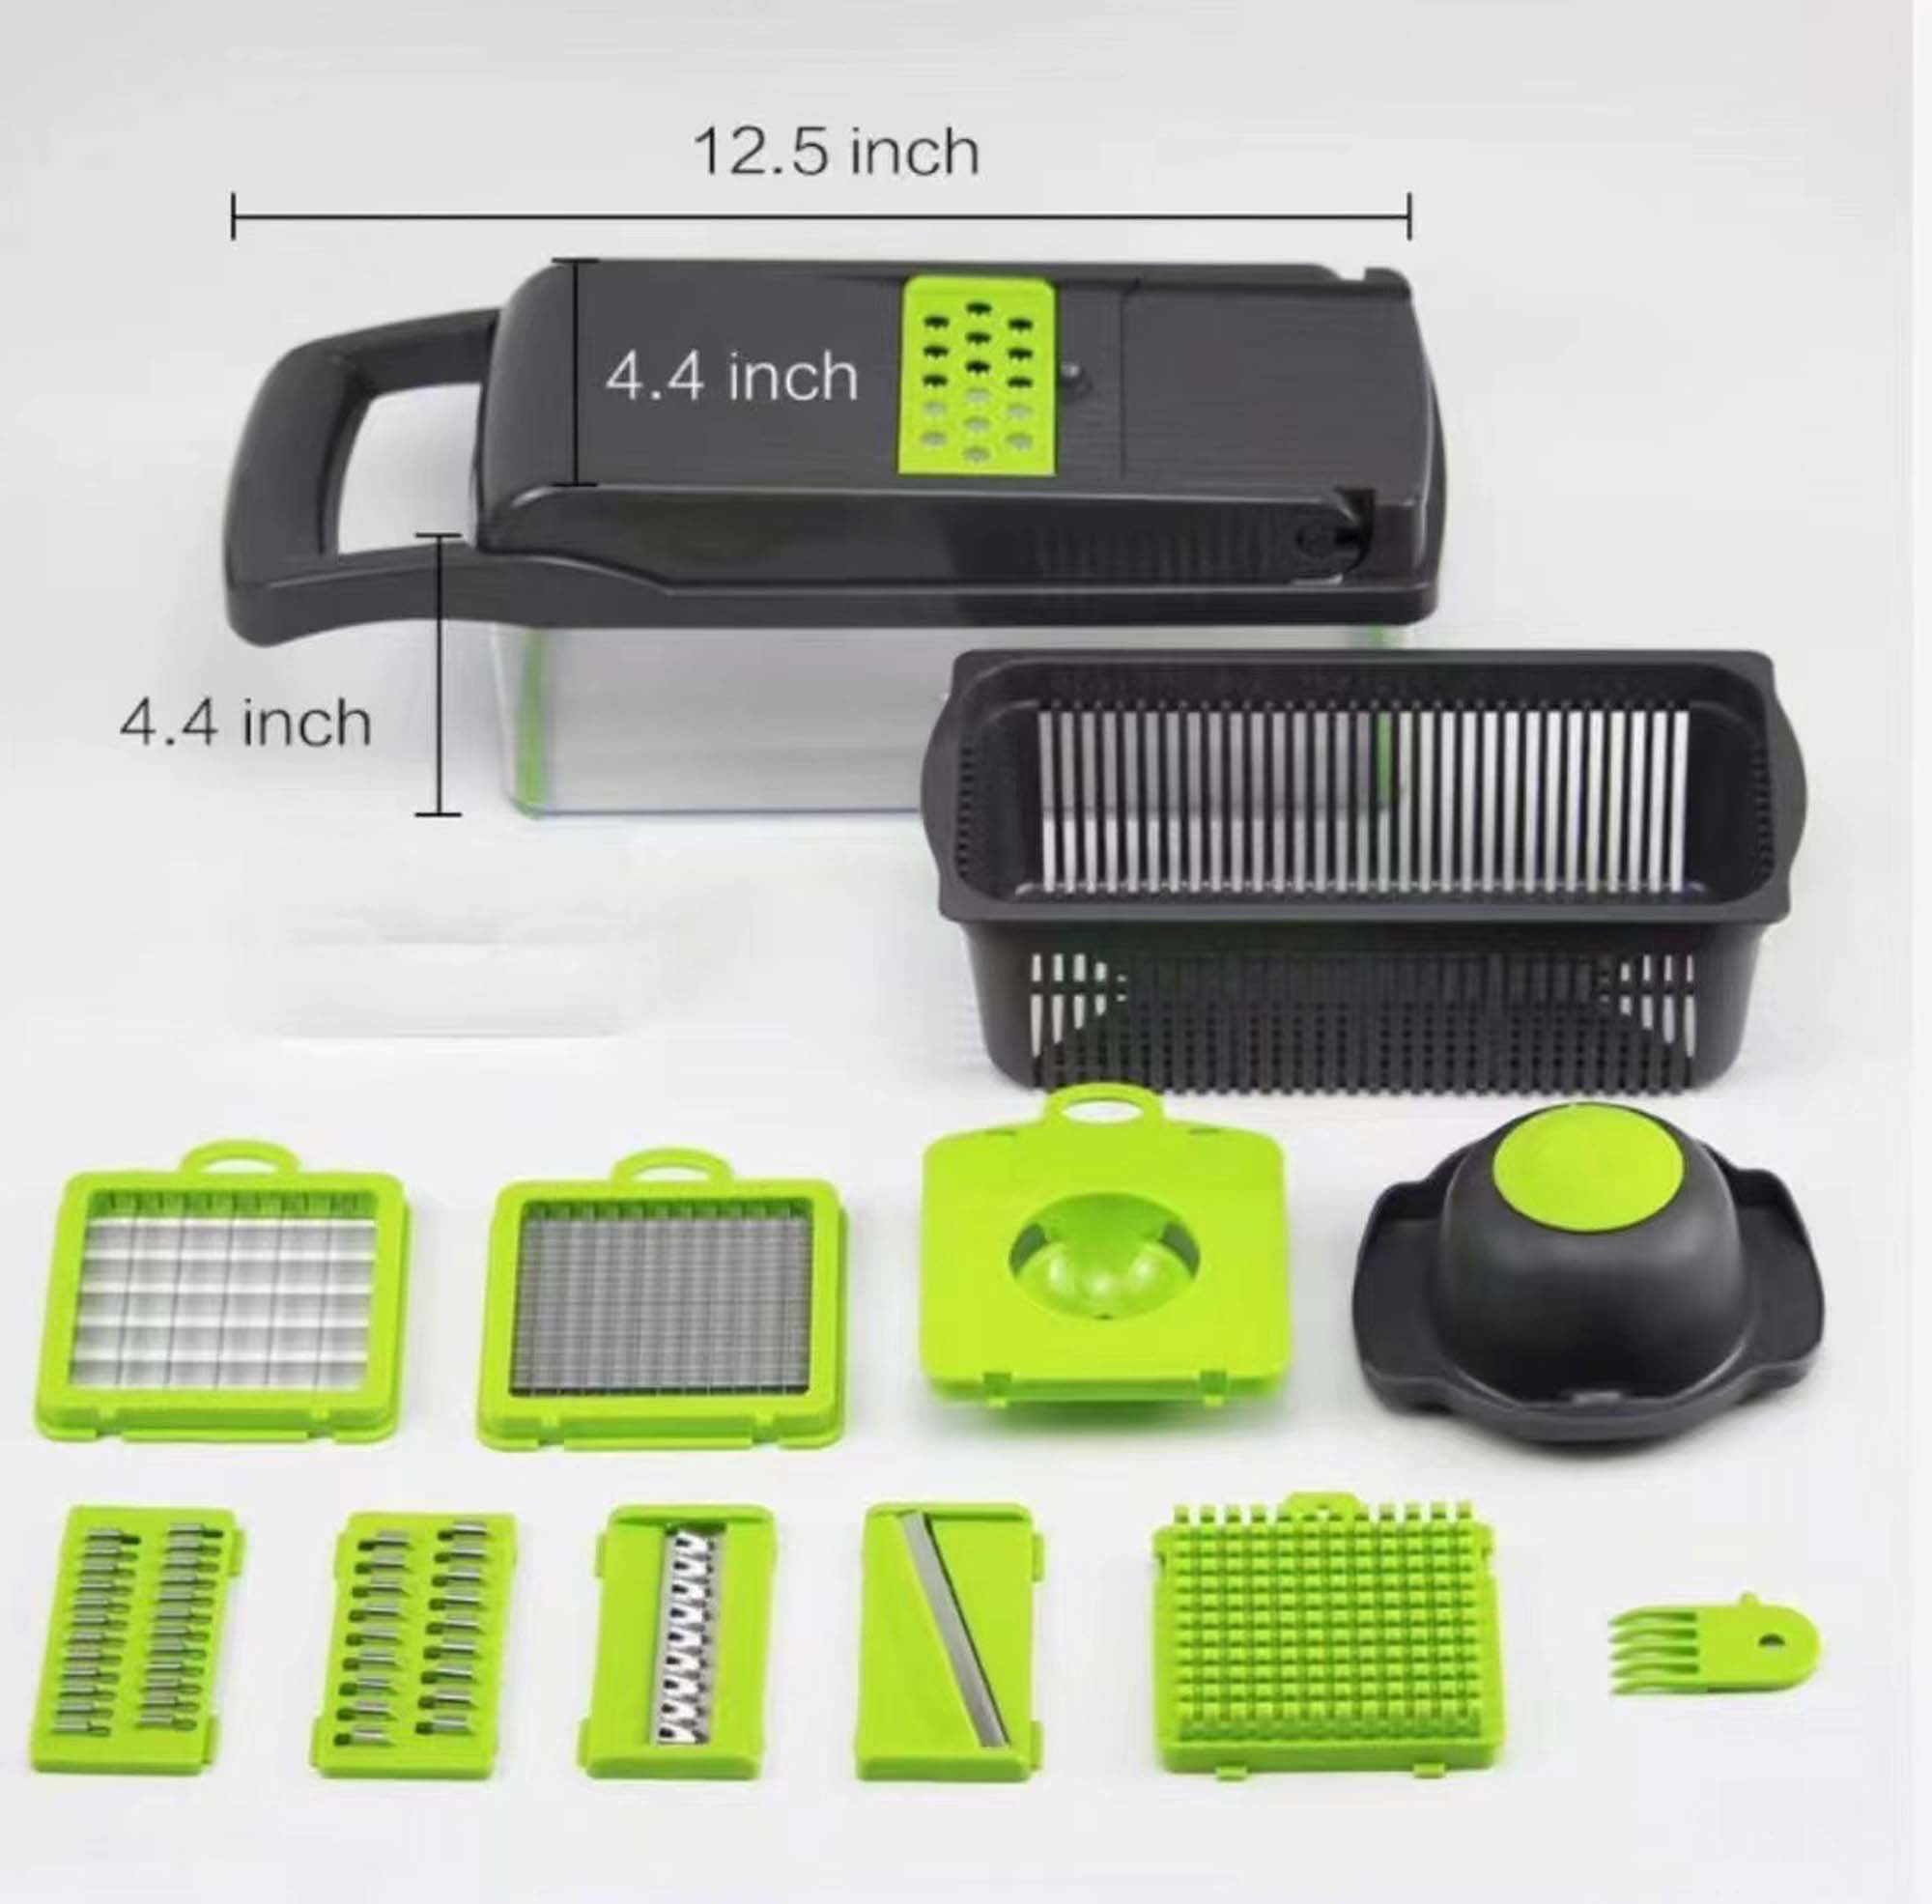 VRJISZTA 13 in 1 Kitchen Vegetable Chopper Slicer Dicer, Food  Chopper/Cutter, veggie Chopper with 8 Blades, Storage Container for Egg  Onion Tomato